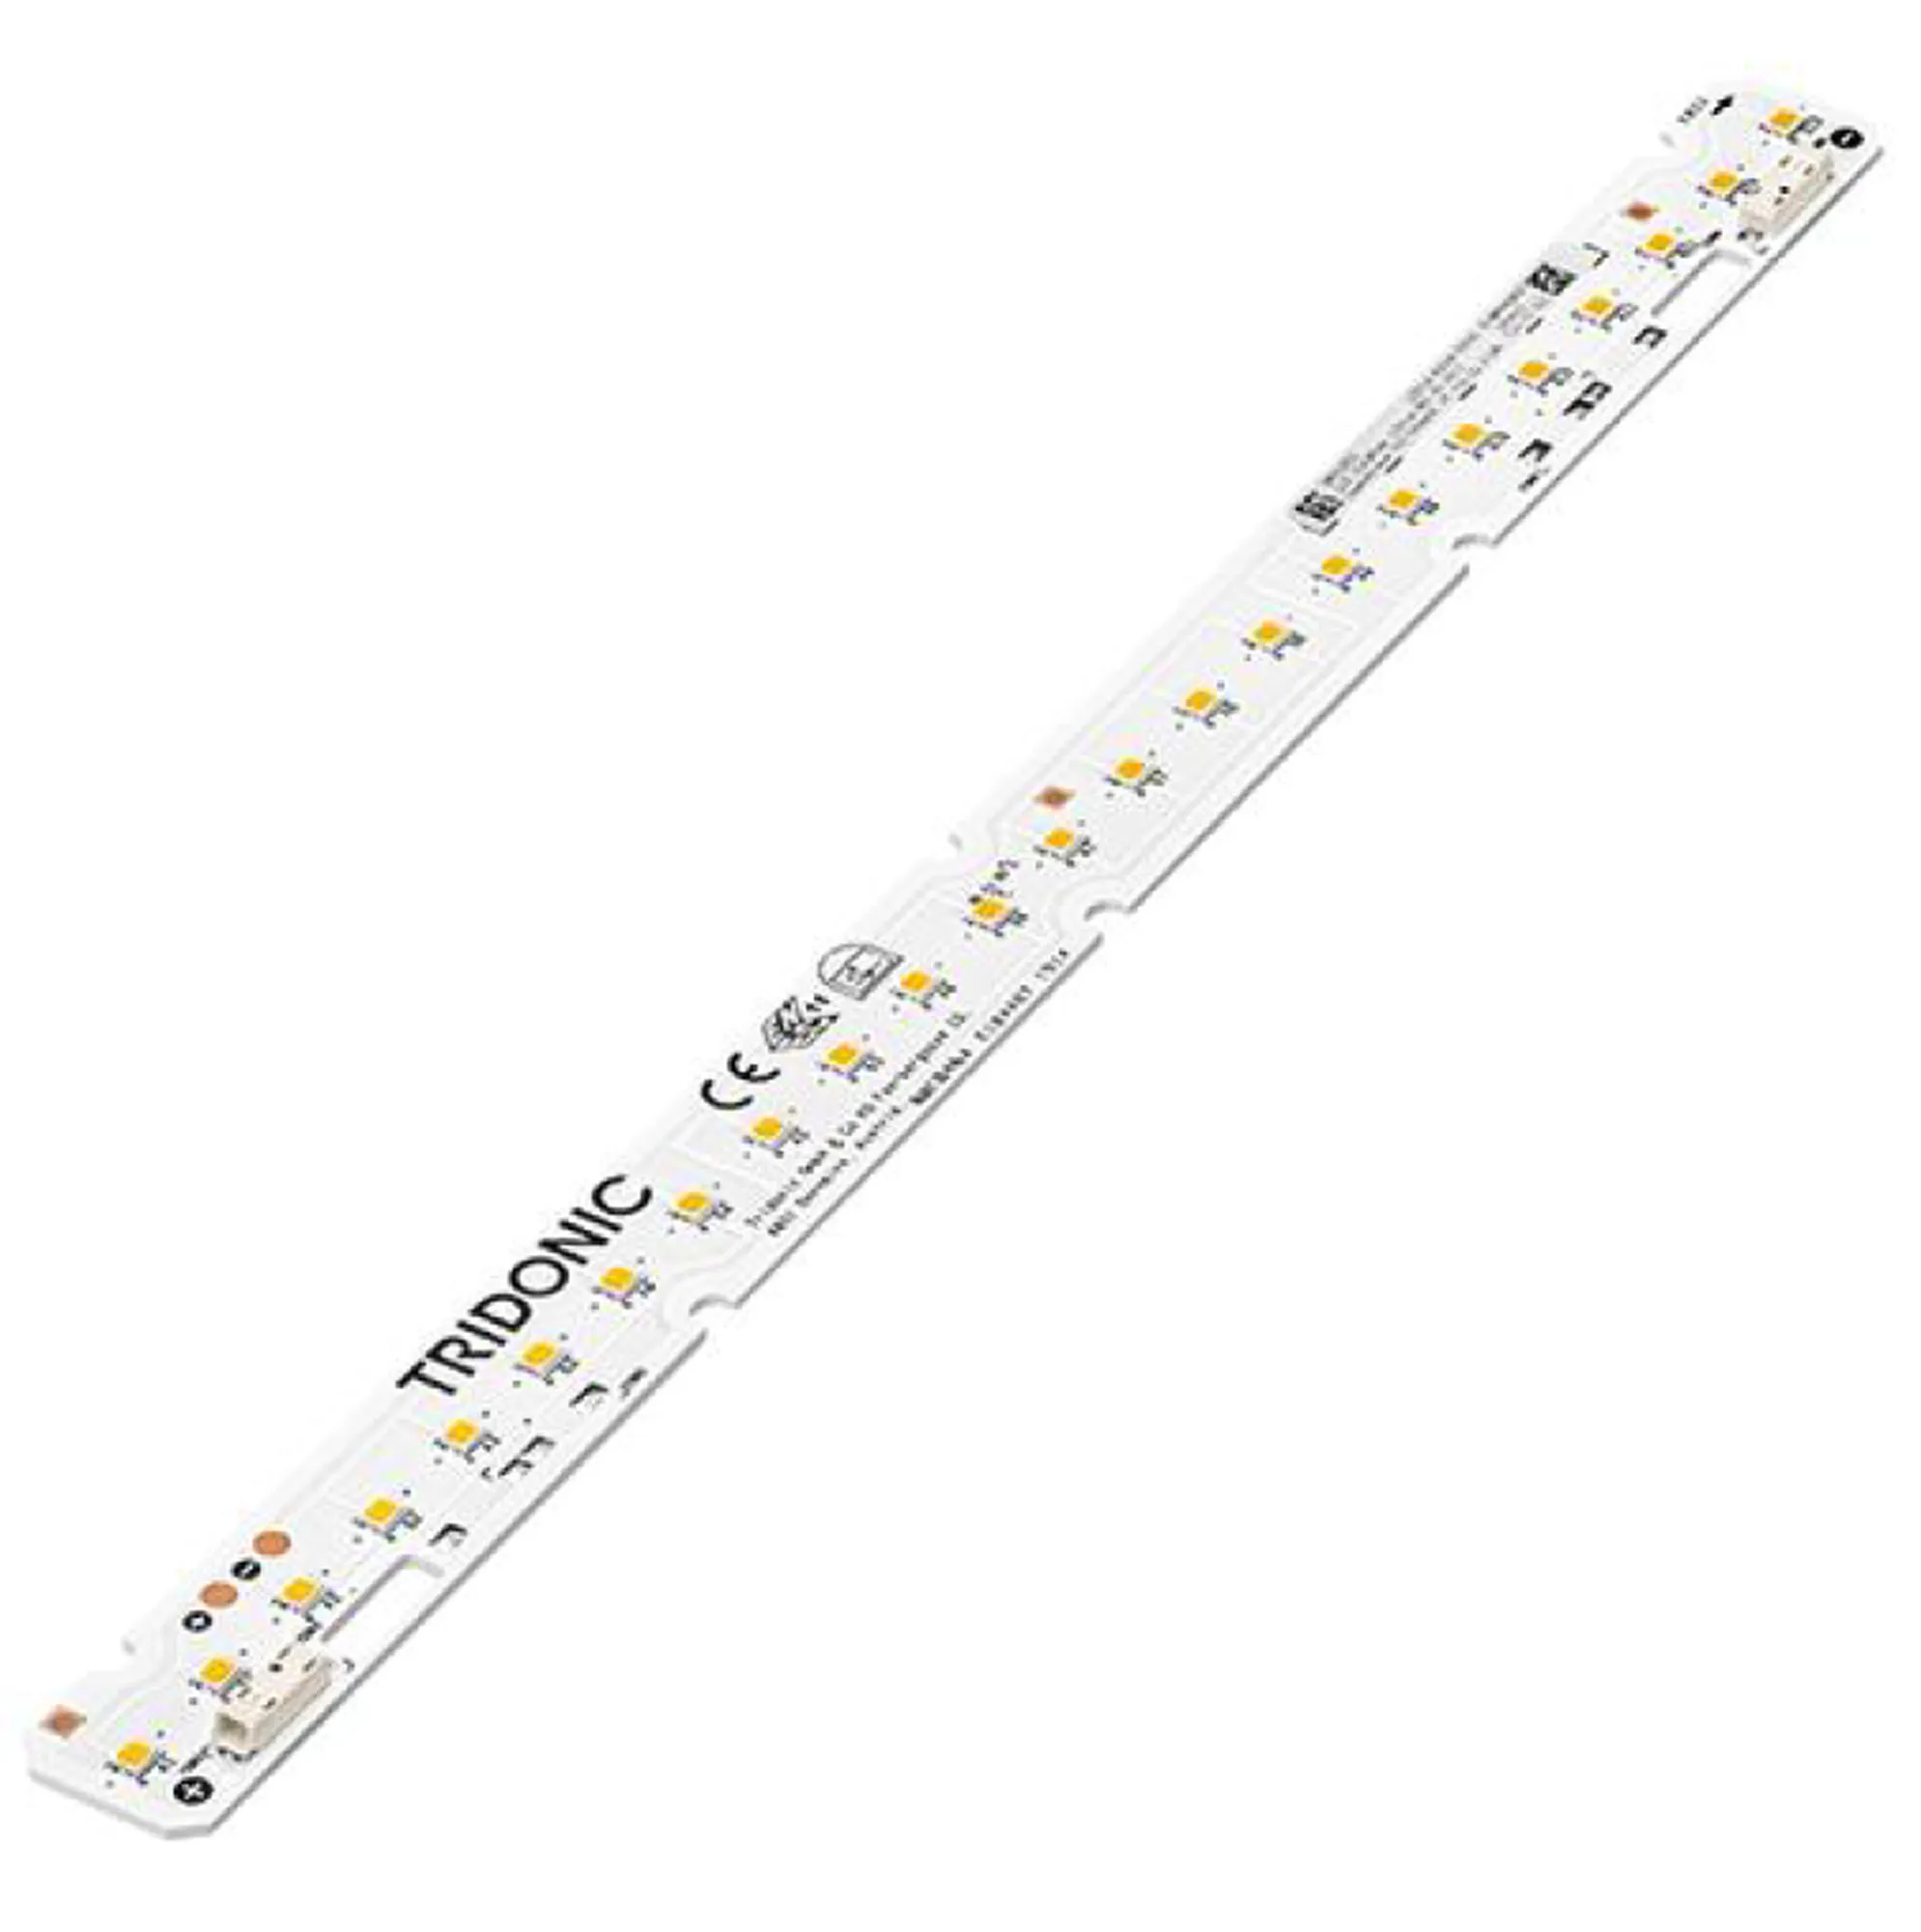 LLE Components Tridonic LED Boards